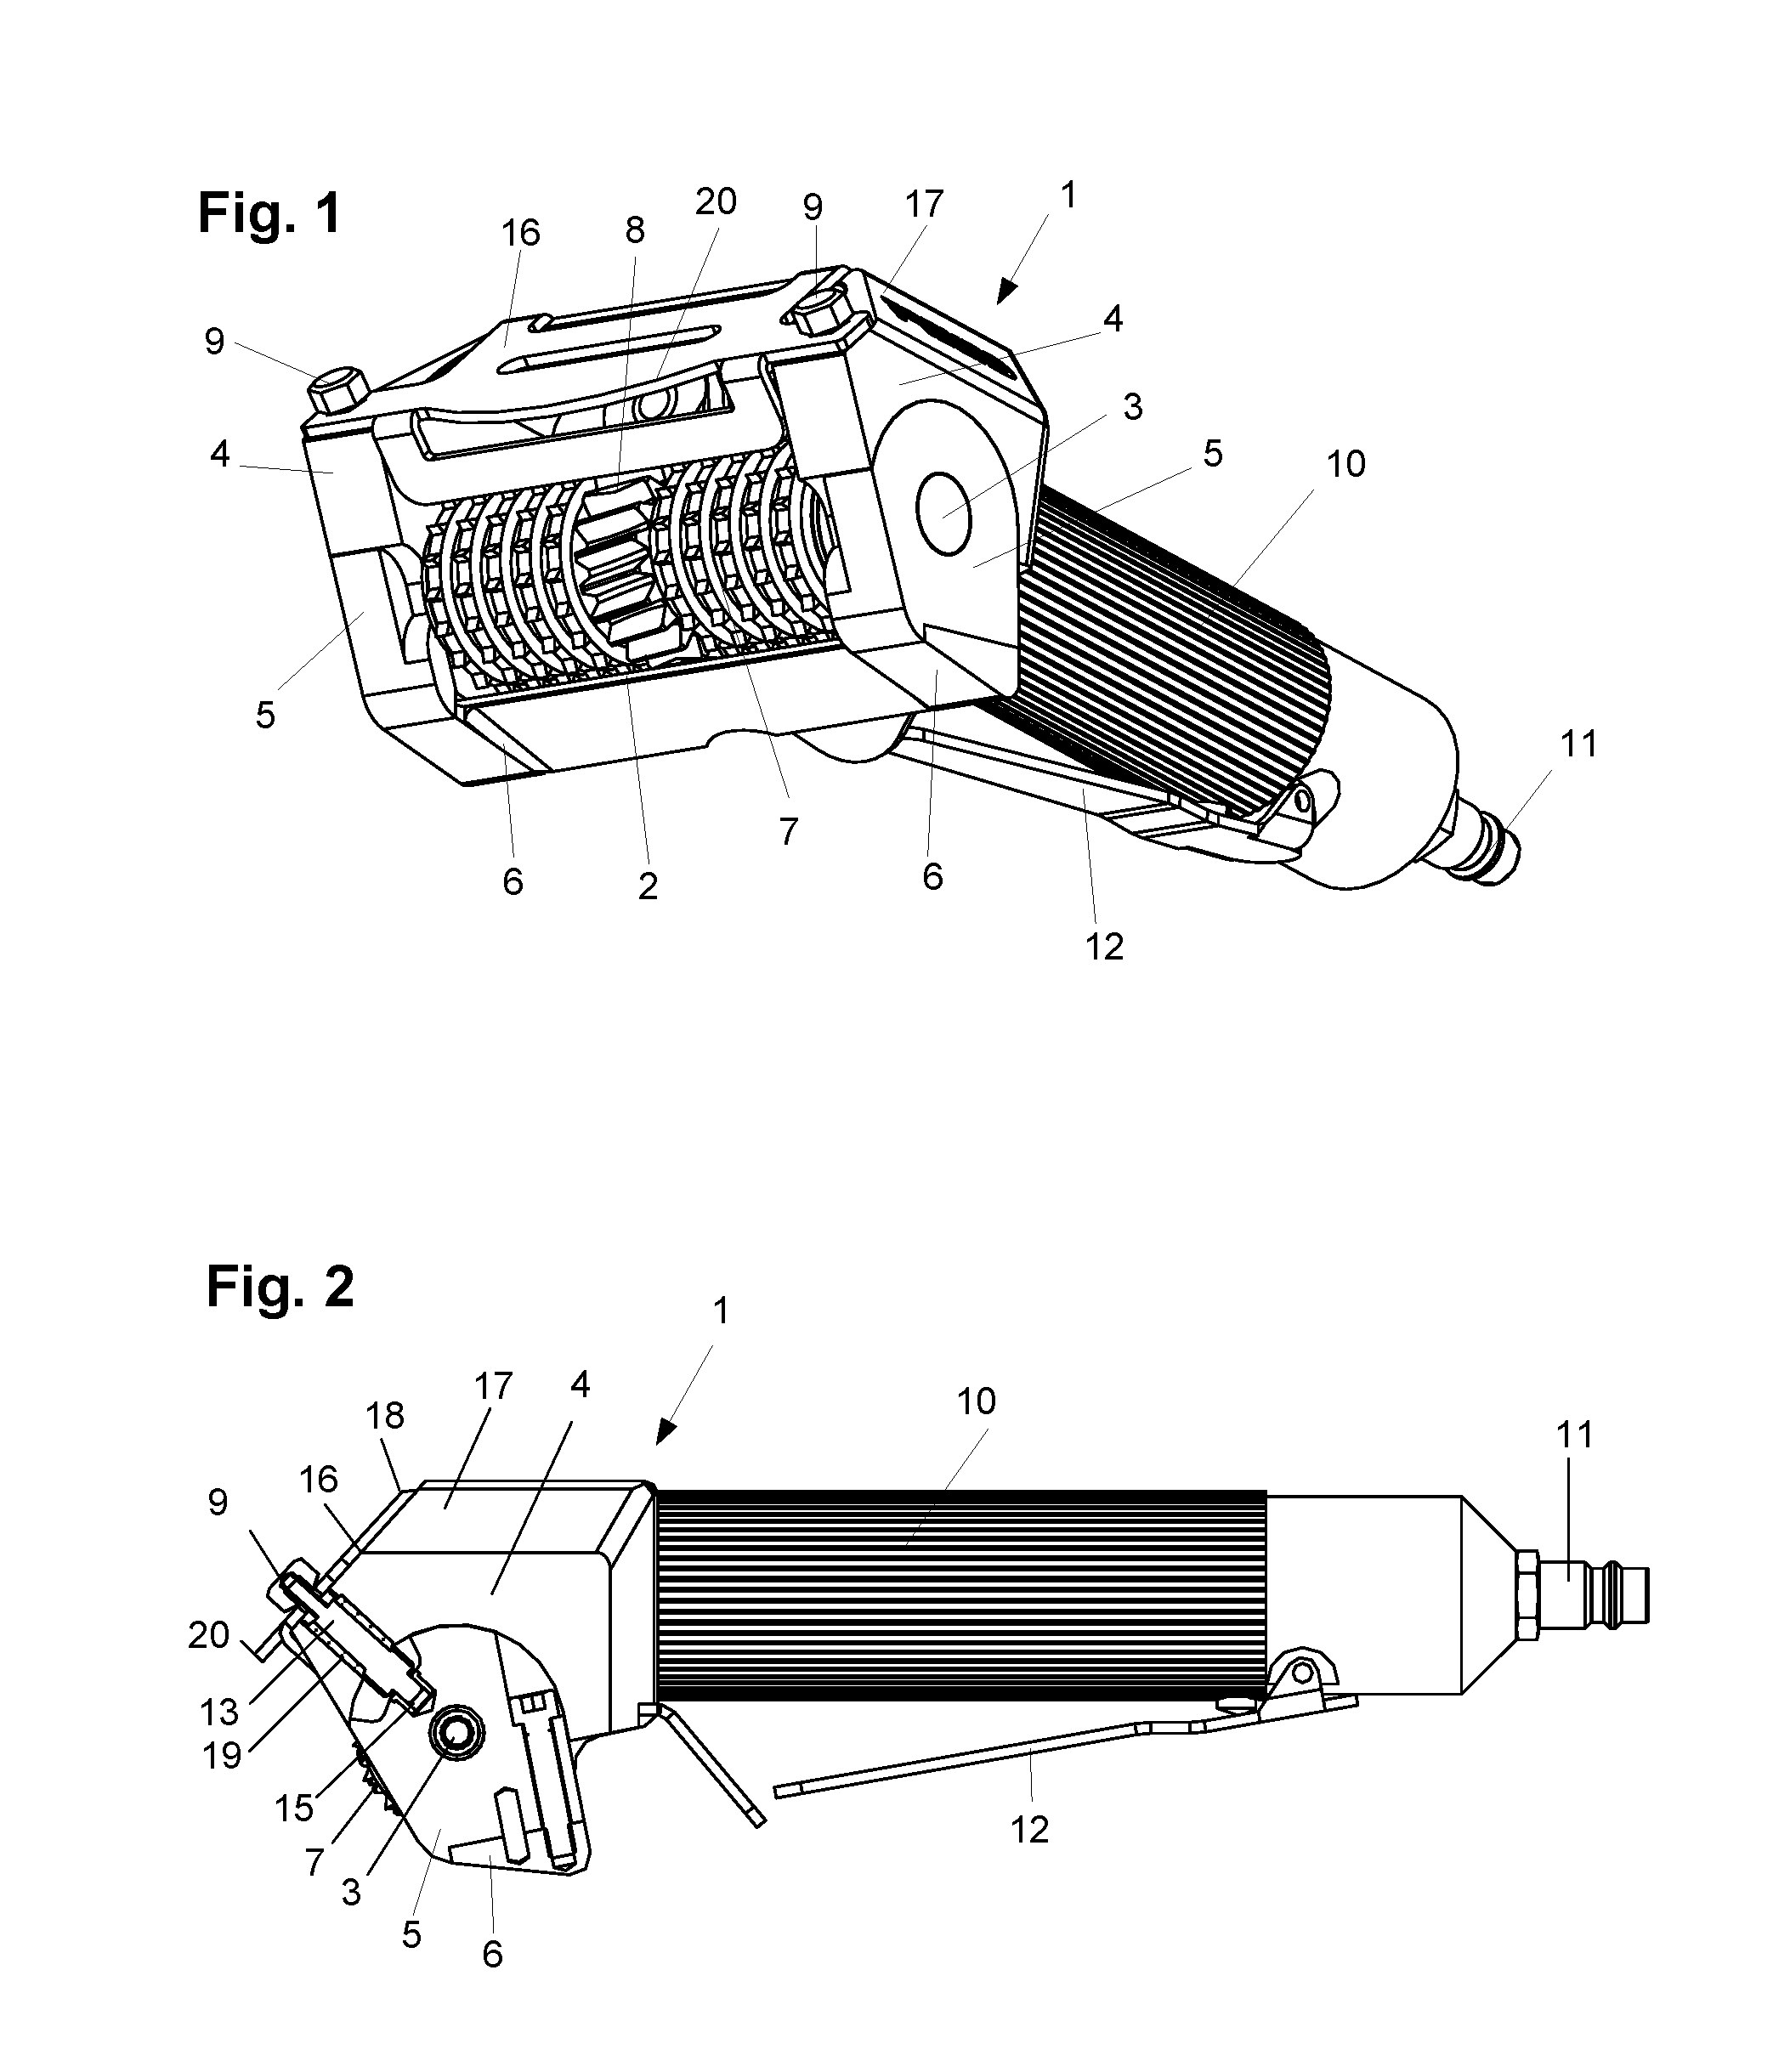 Handheld skinning device with a simple blade replacement